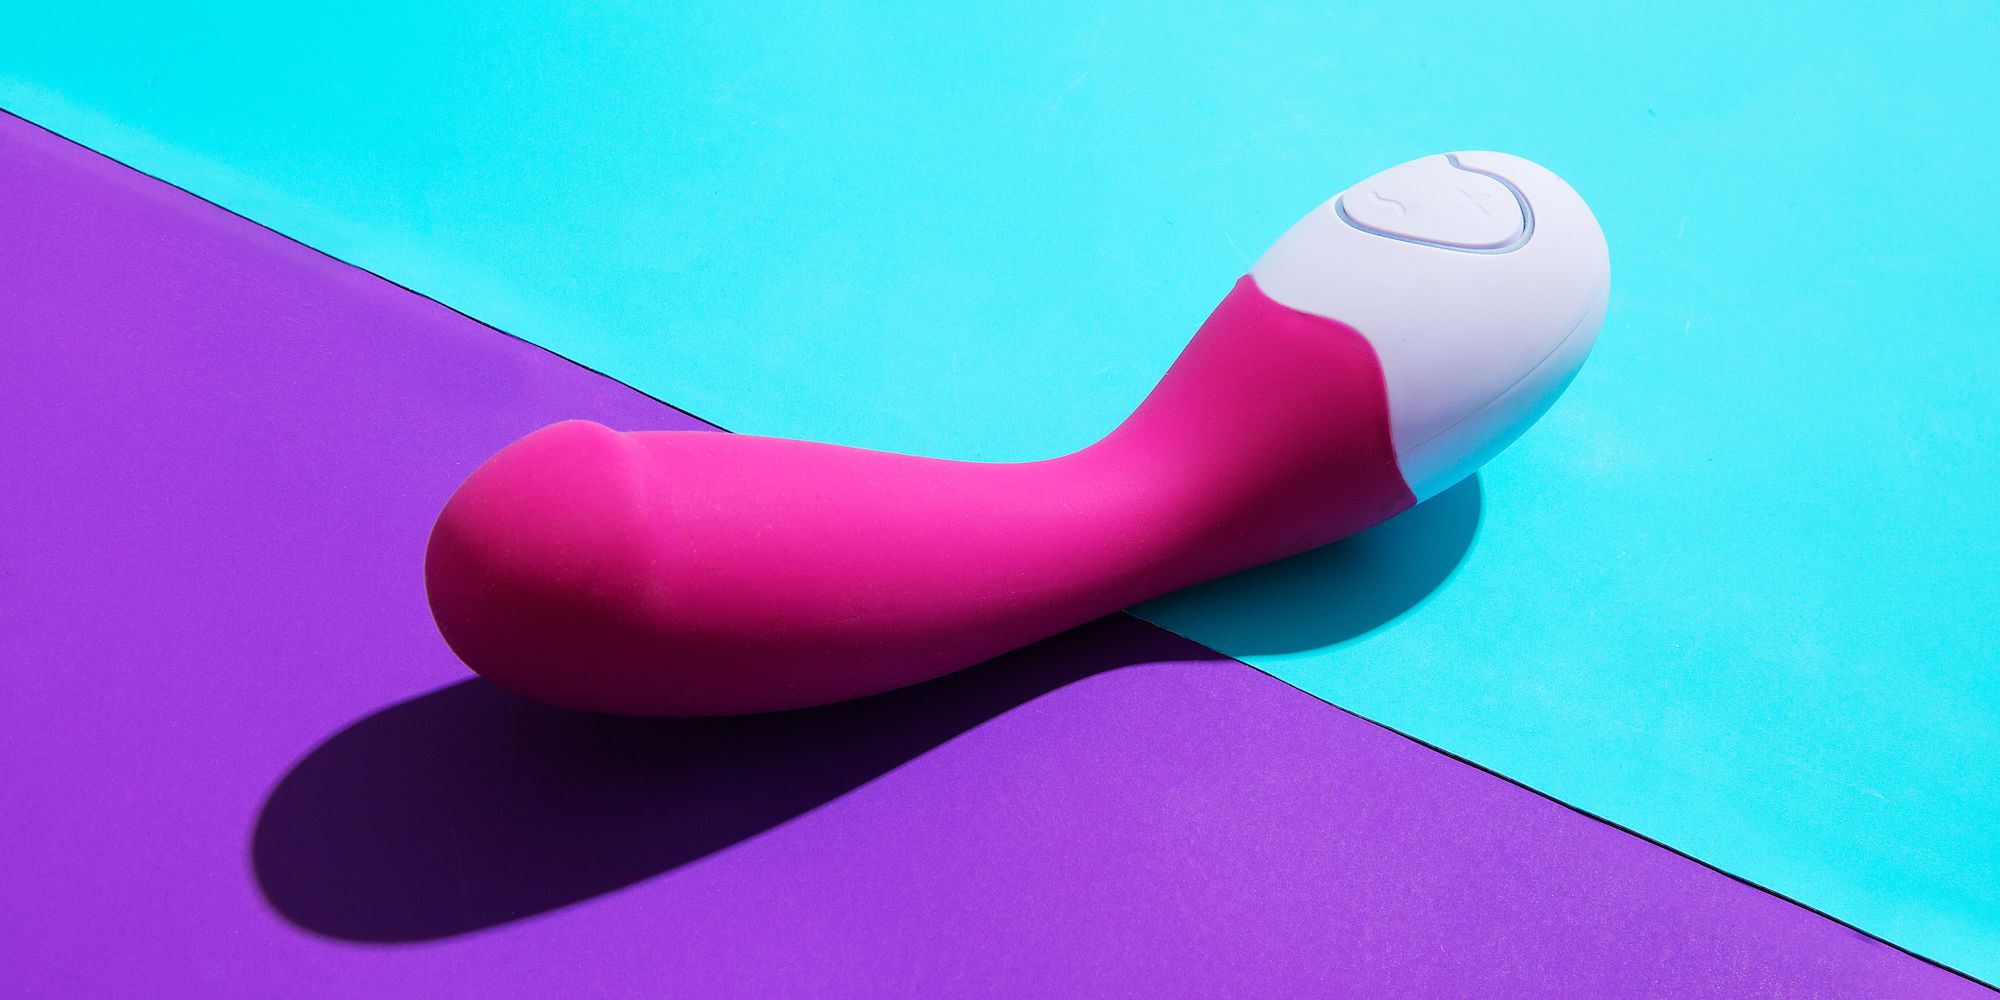 How Does Using a Vibrator Affect Your Body? photo